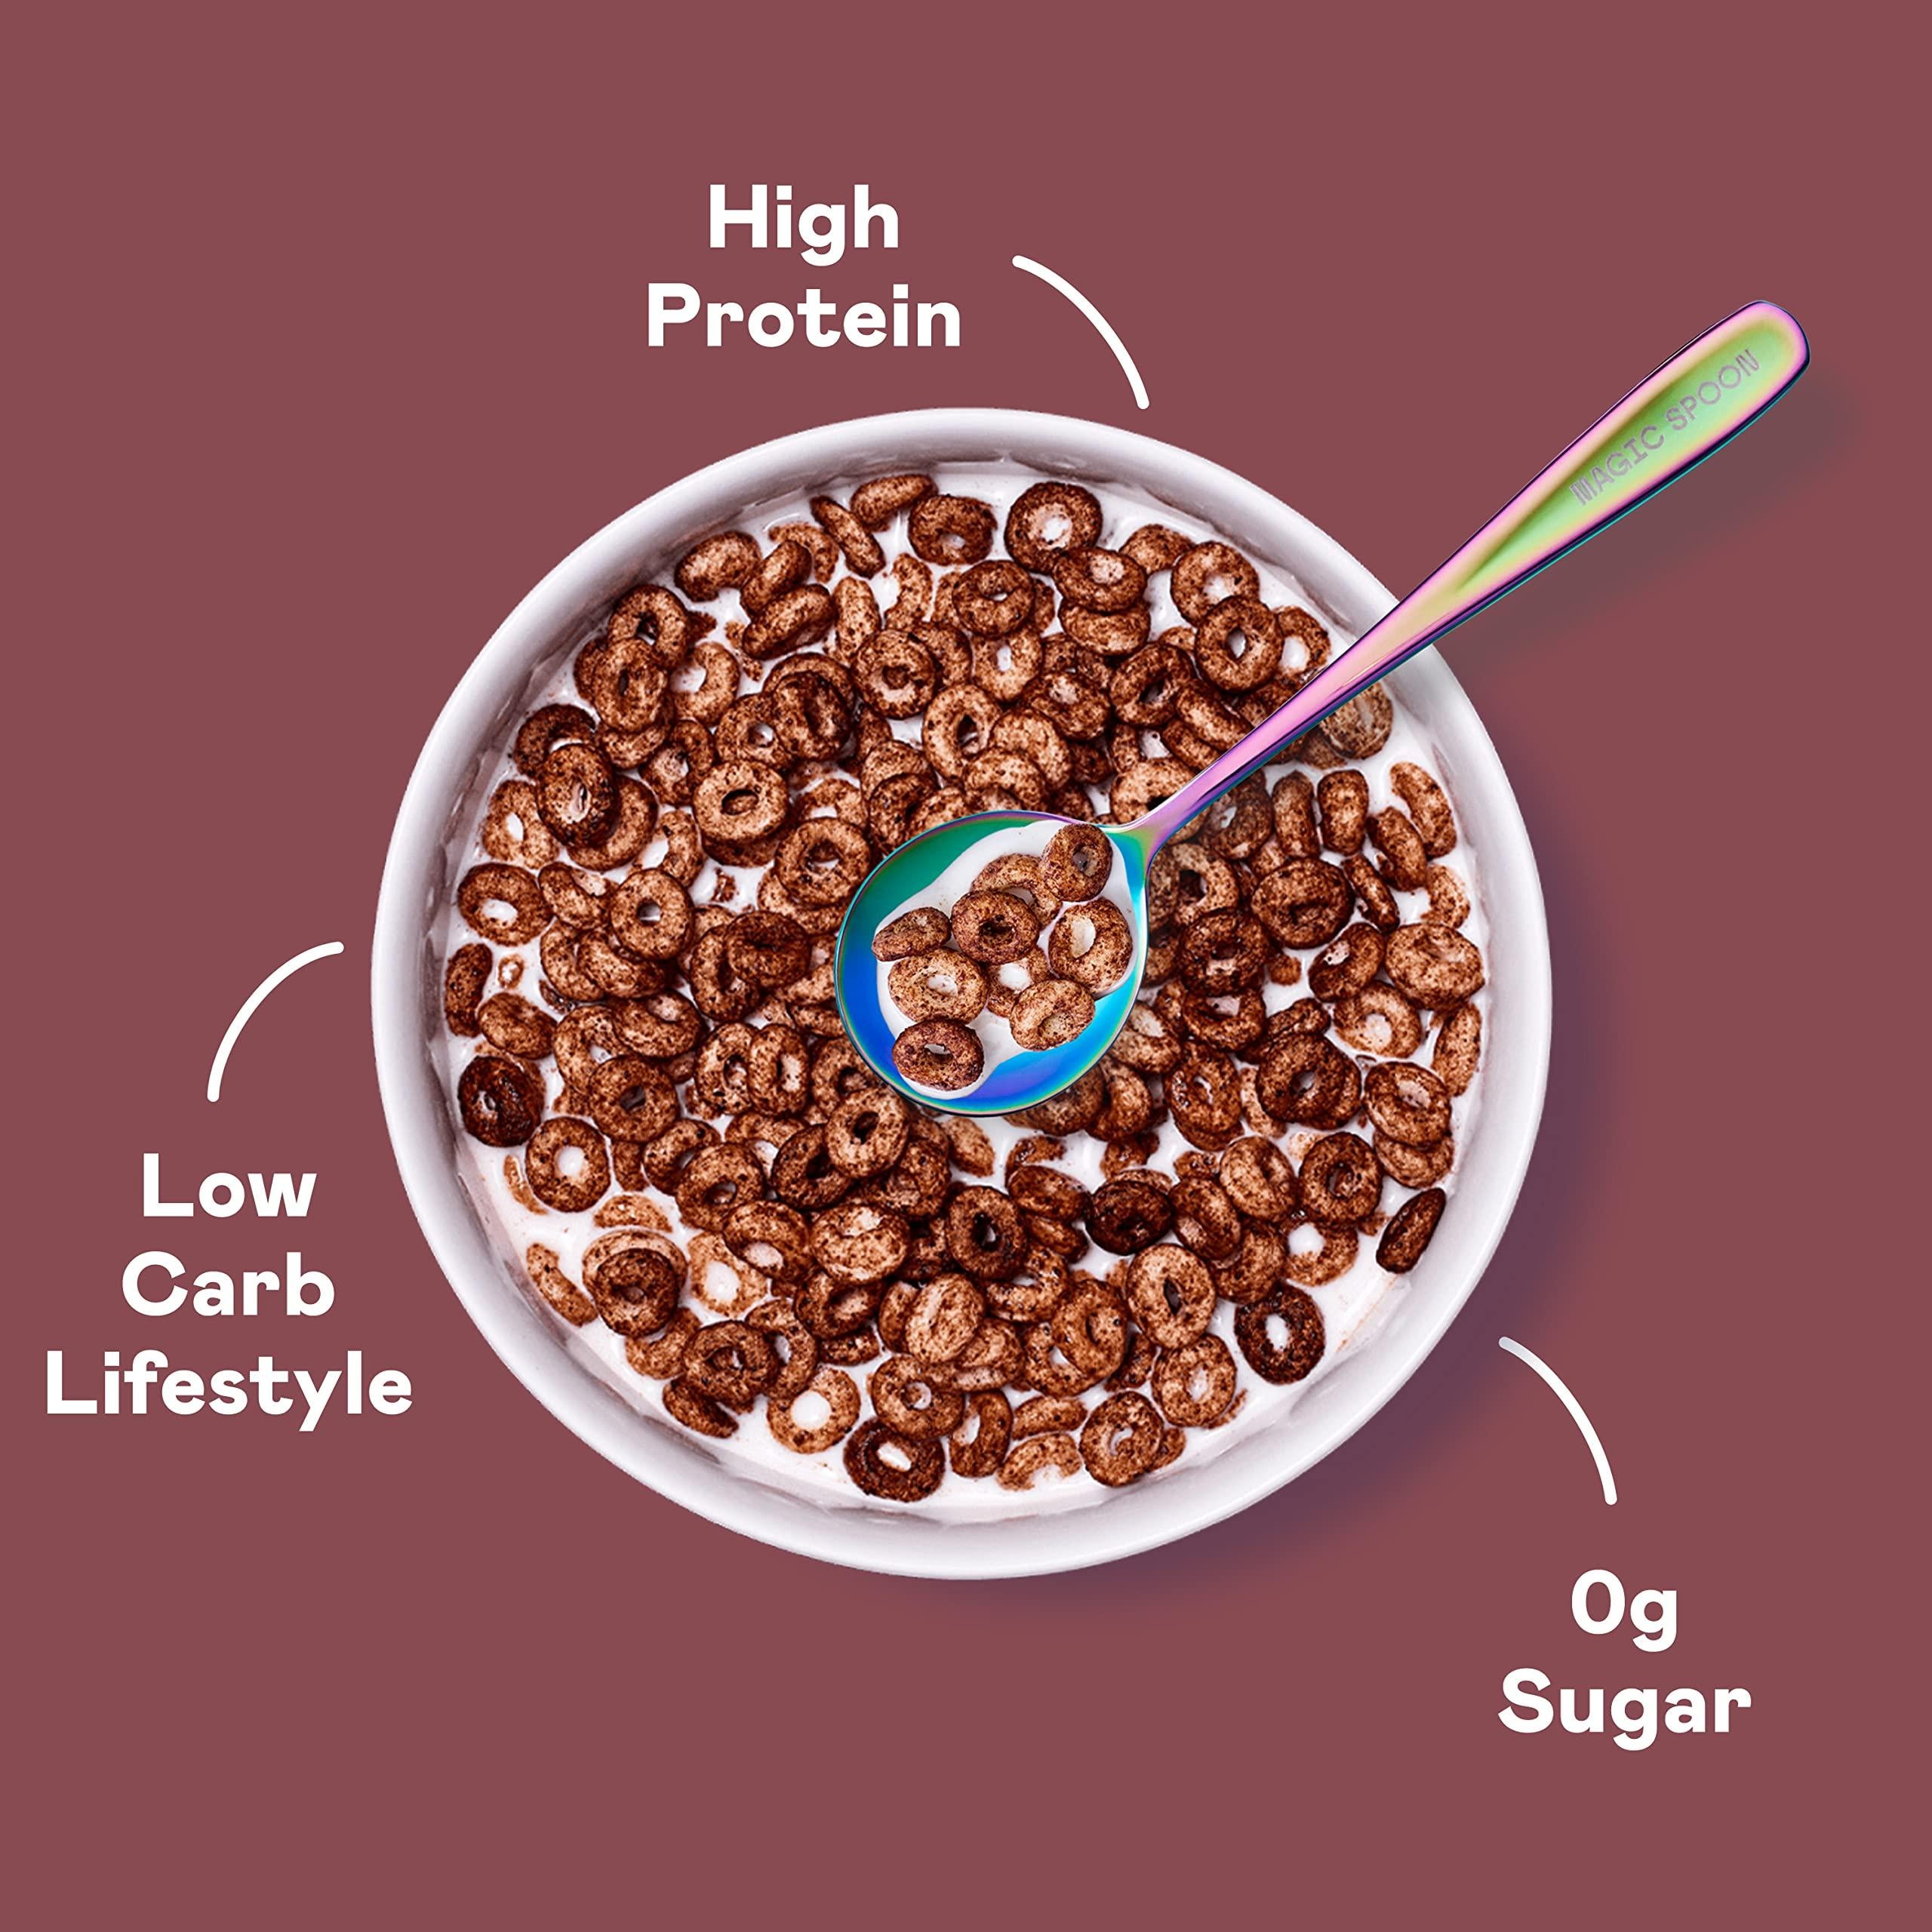 Magic Spoon Cereal, Cocoa 4-Pack of Cereal - Keto &amp; Low Carb Lifestyles I Gluten &amp; Grain Free I High Protein I 0g Sugar